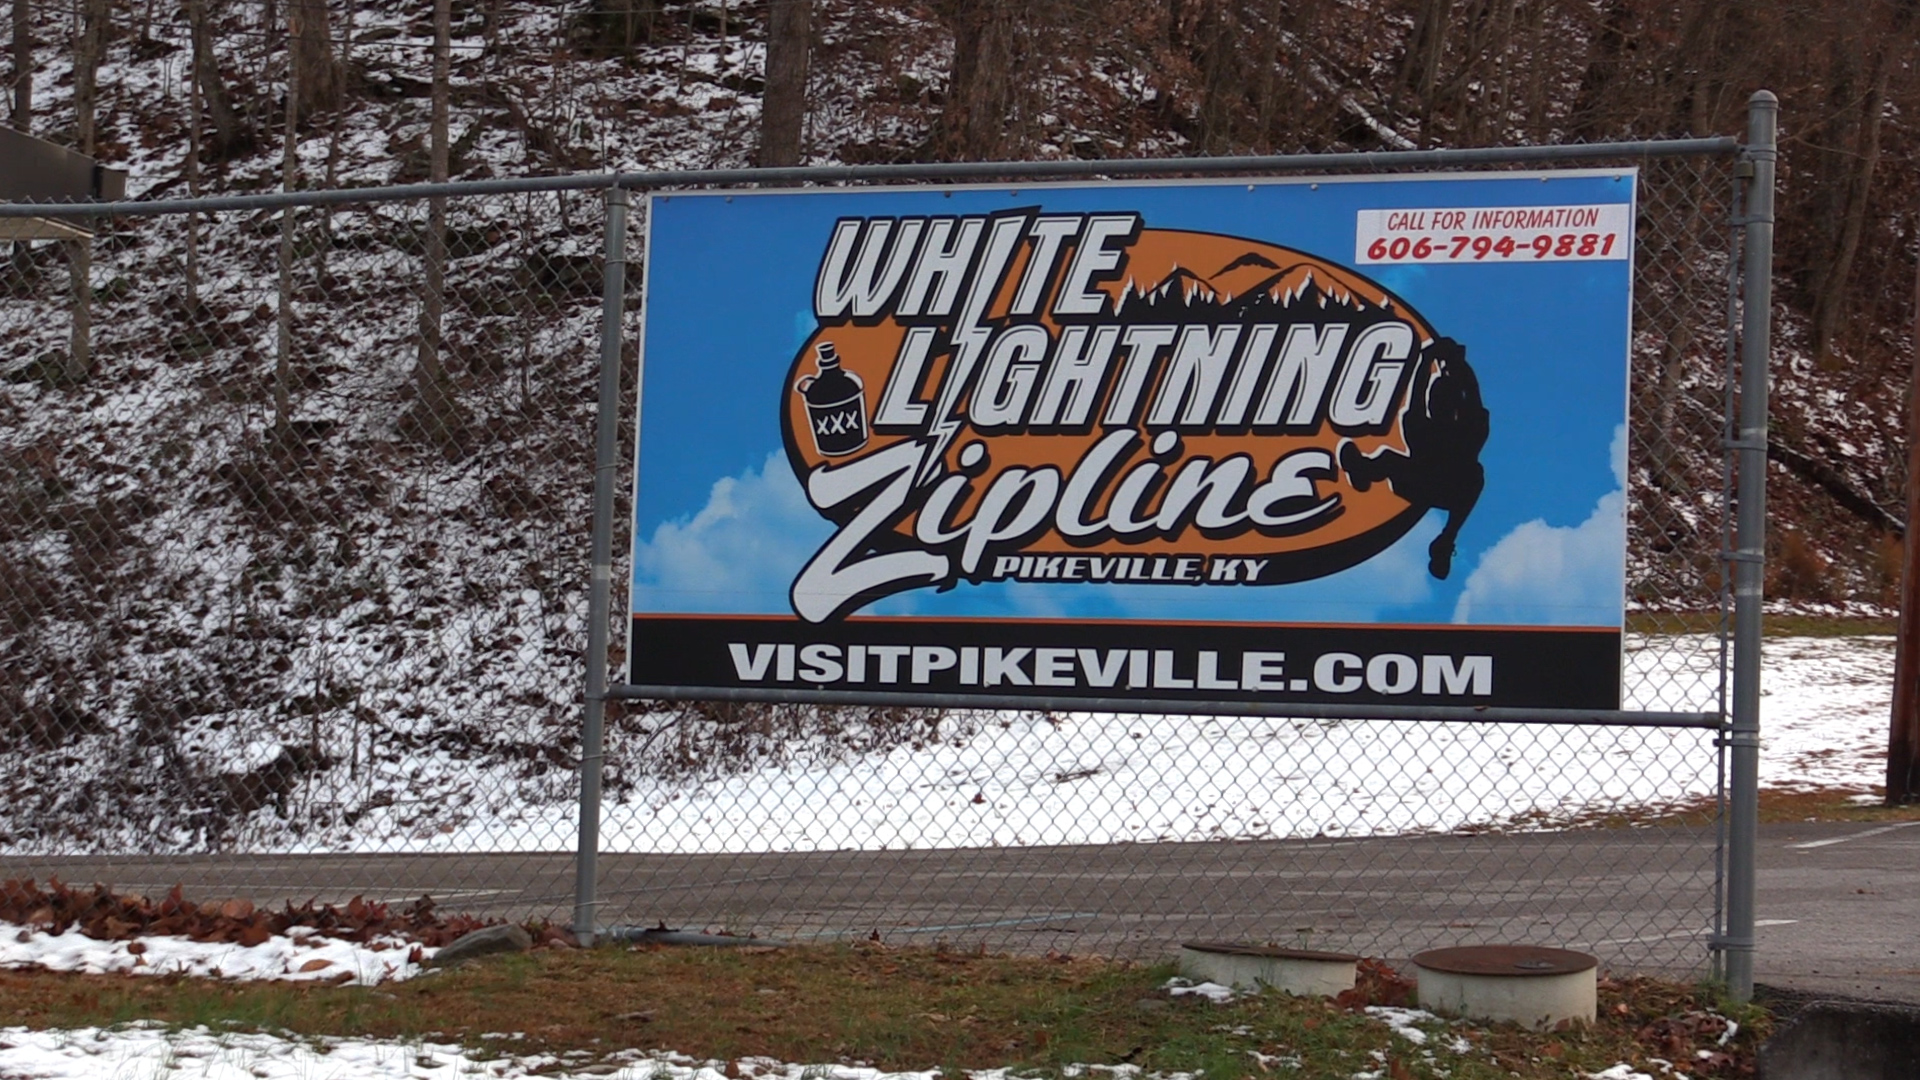 Pikeville extends contract for attractions operator